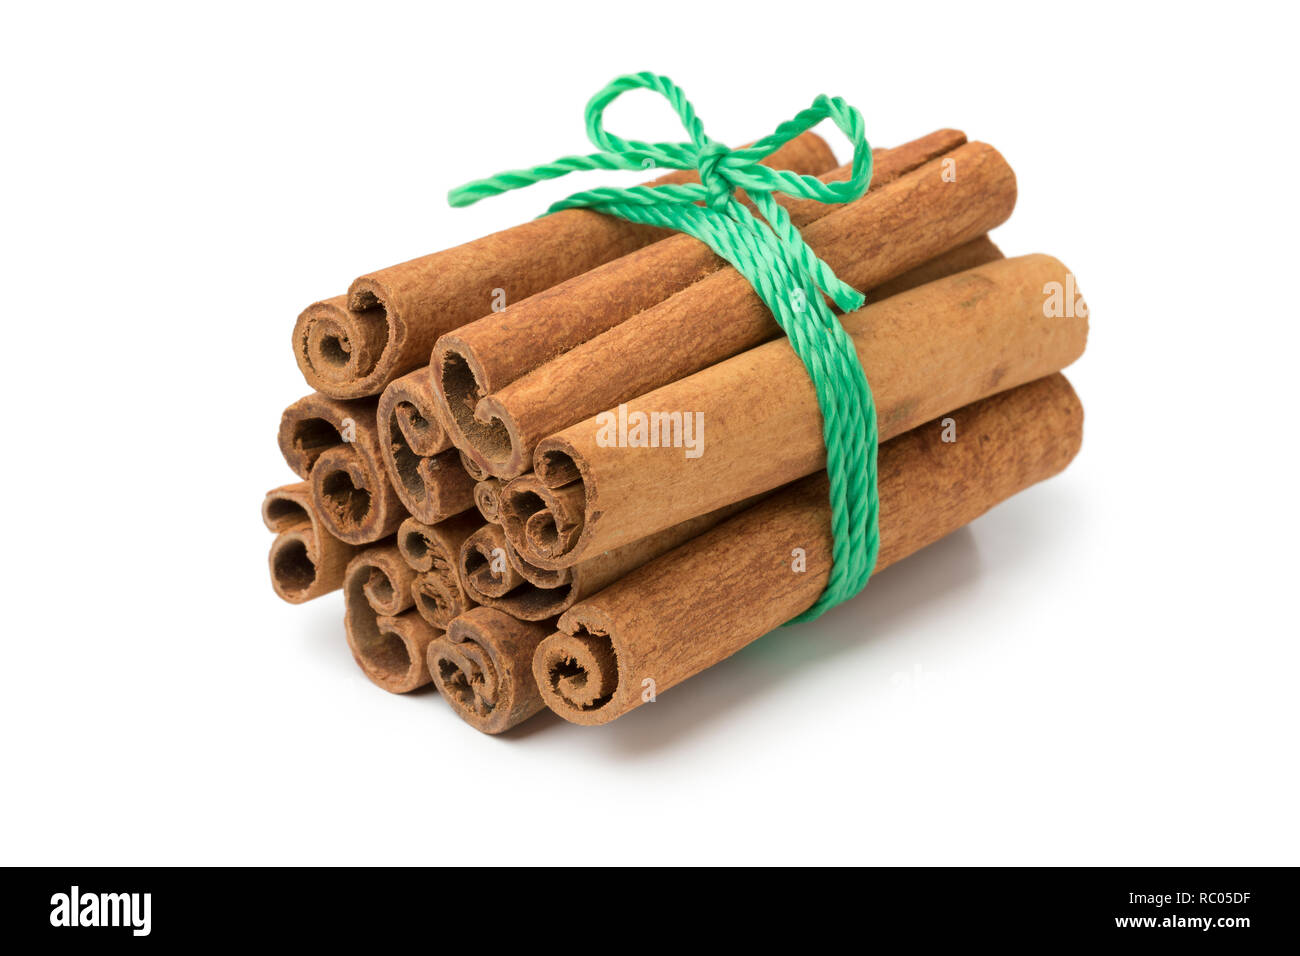 Bunch of cassia cinnamon sticks with a green cord Stock Photo